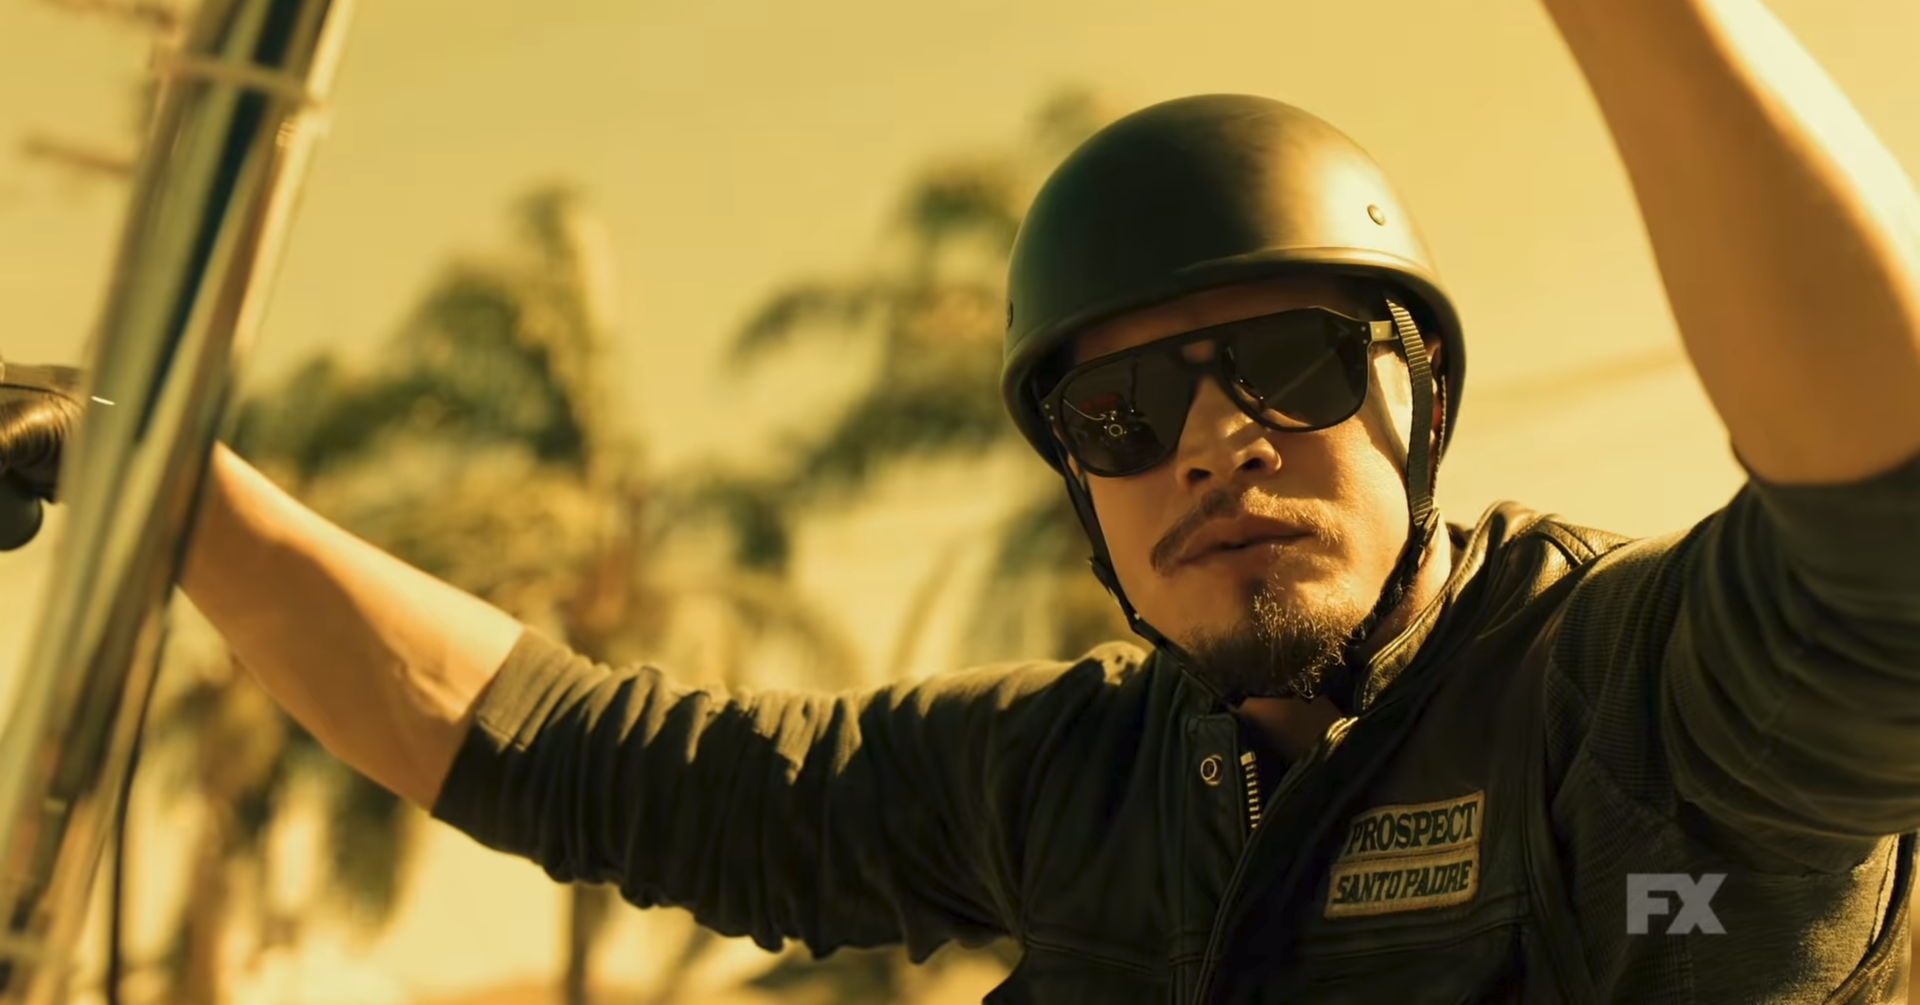 Watch the Savage First FullLength Trailer for 'Sons of Anarchy